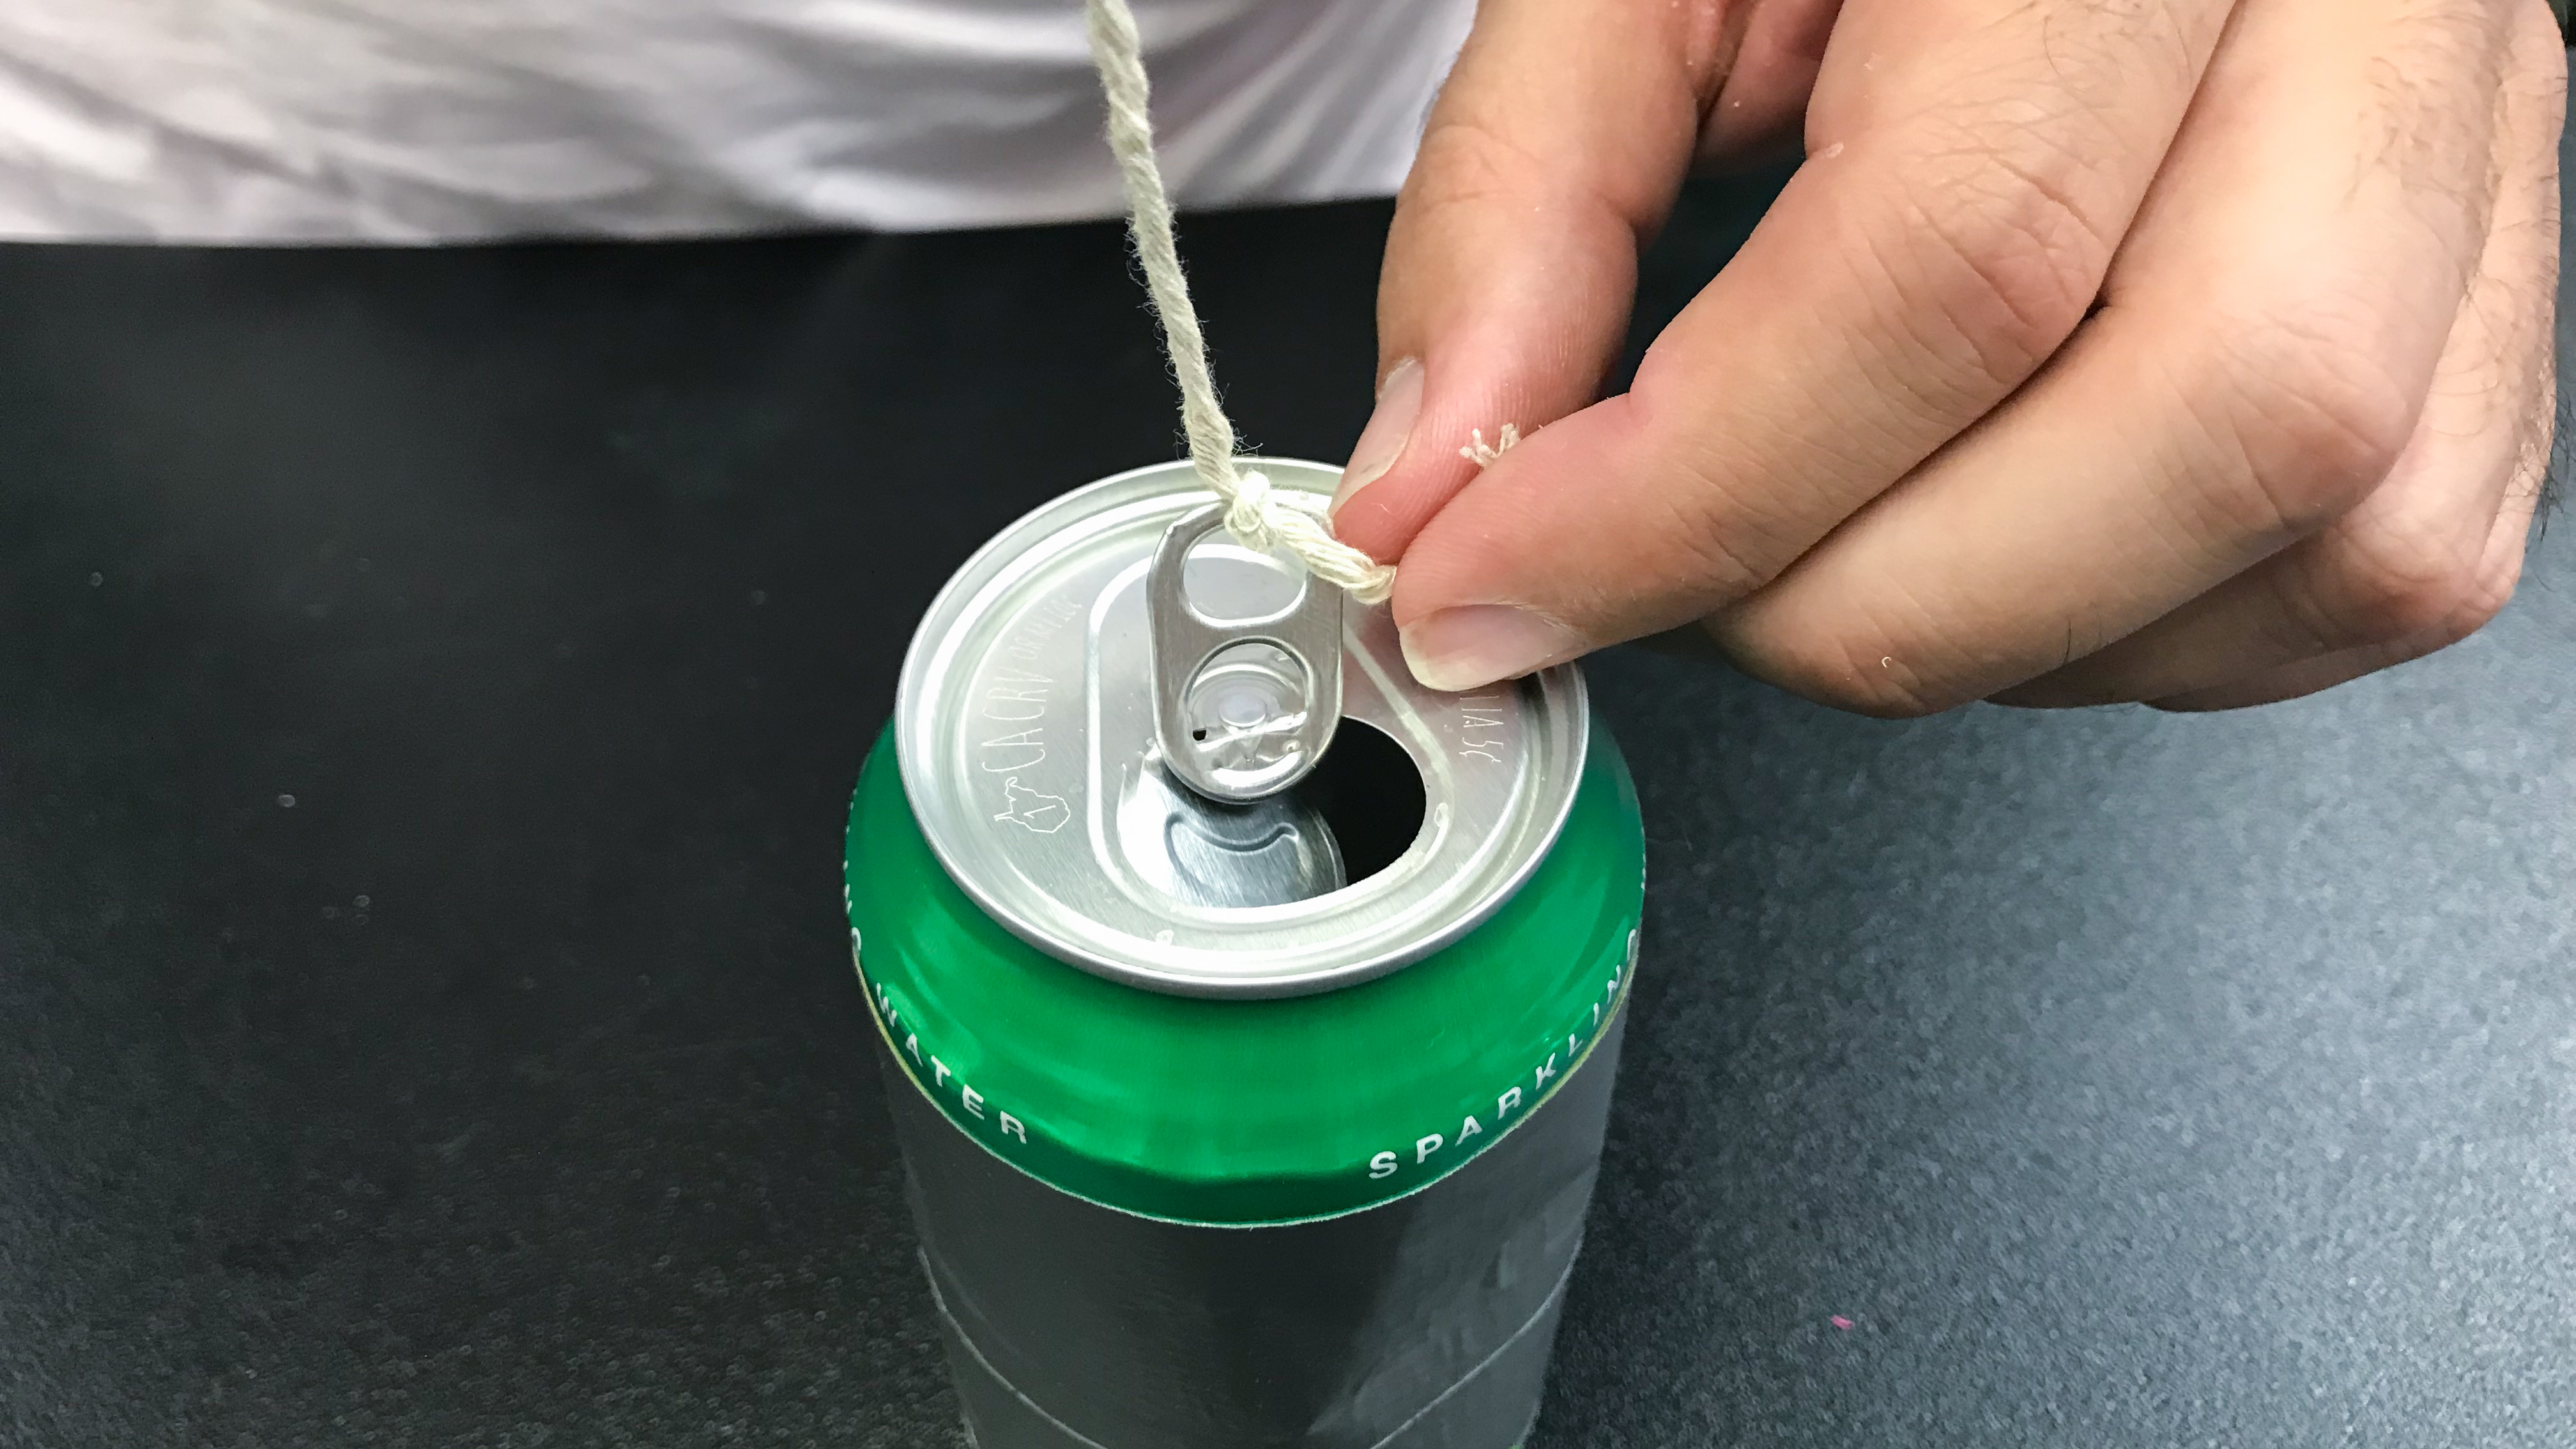 A string is tied to the pop tab of the can.